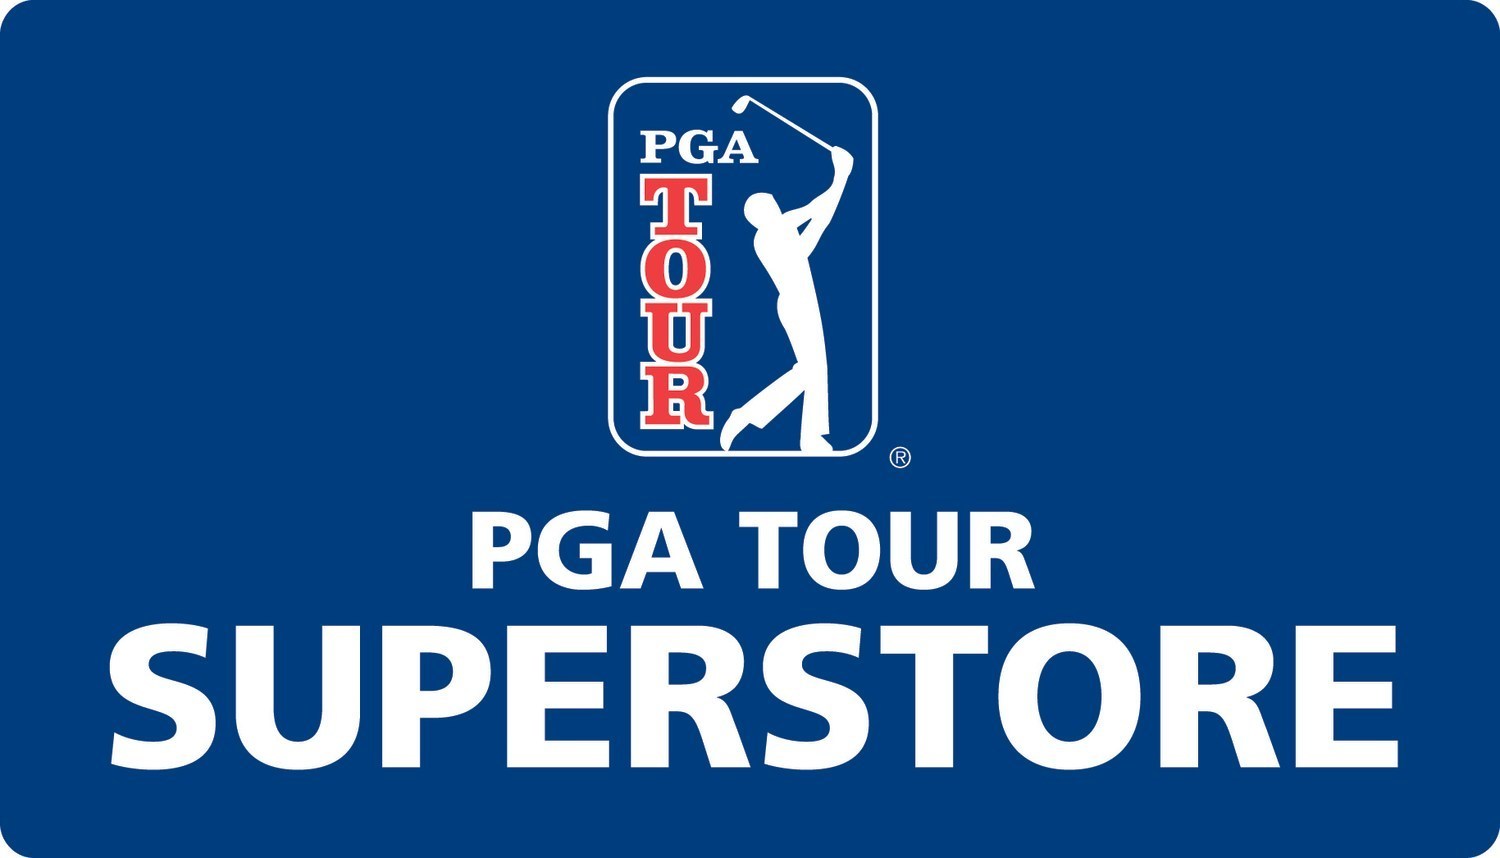 PGA TOUR Superstore Experiential Golf Retail Expands Presence in Orlando